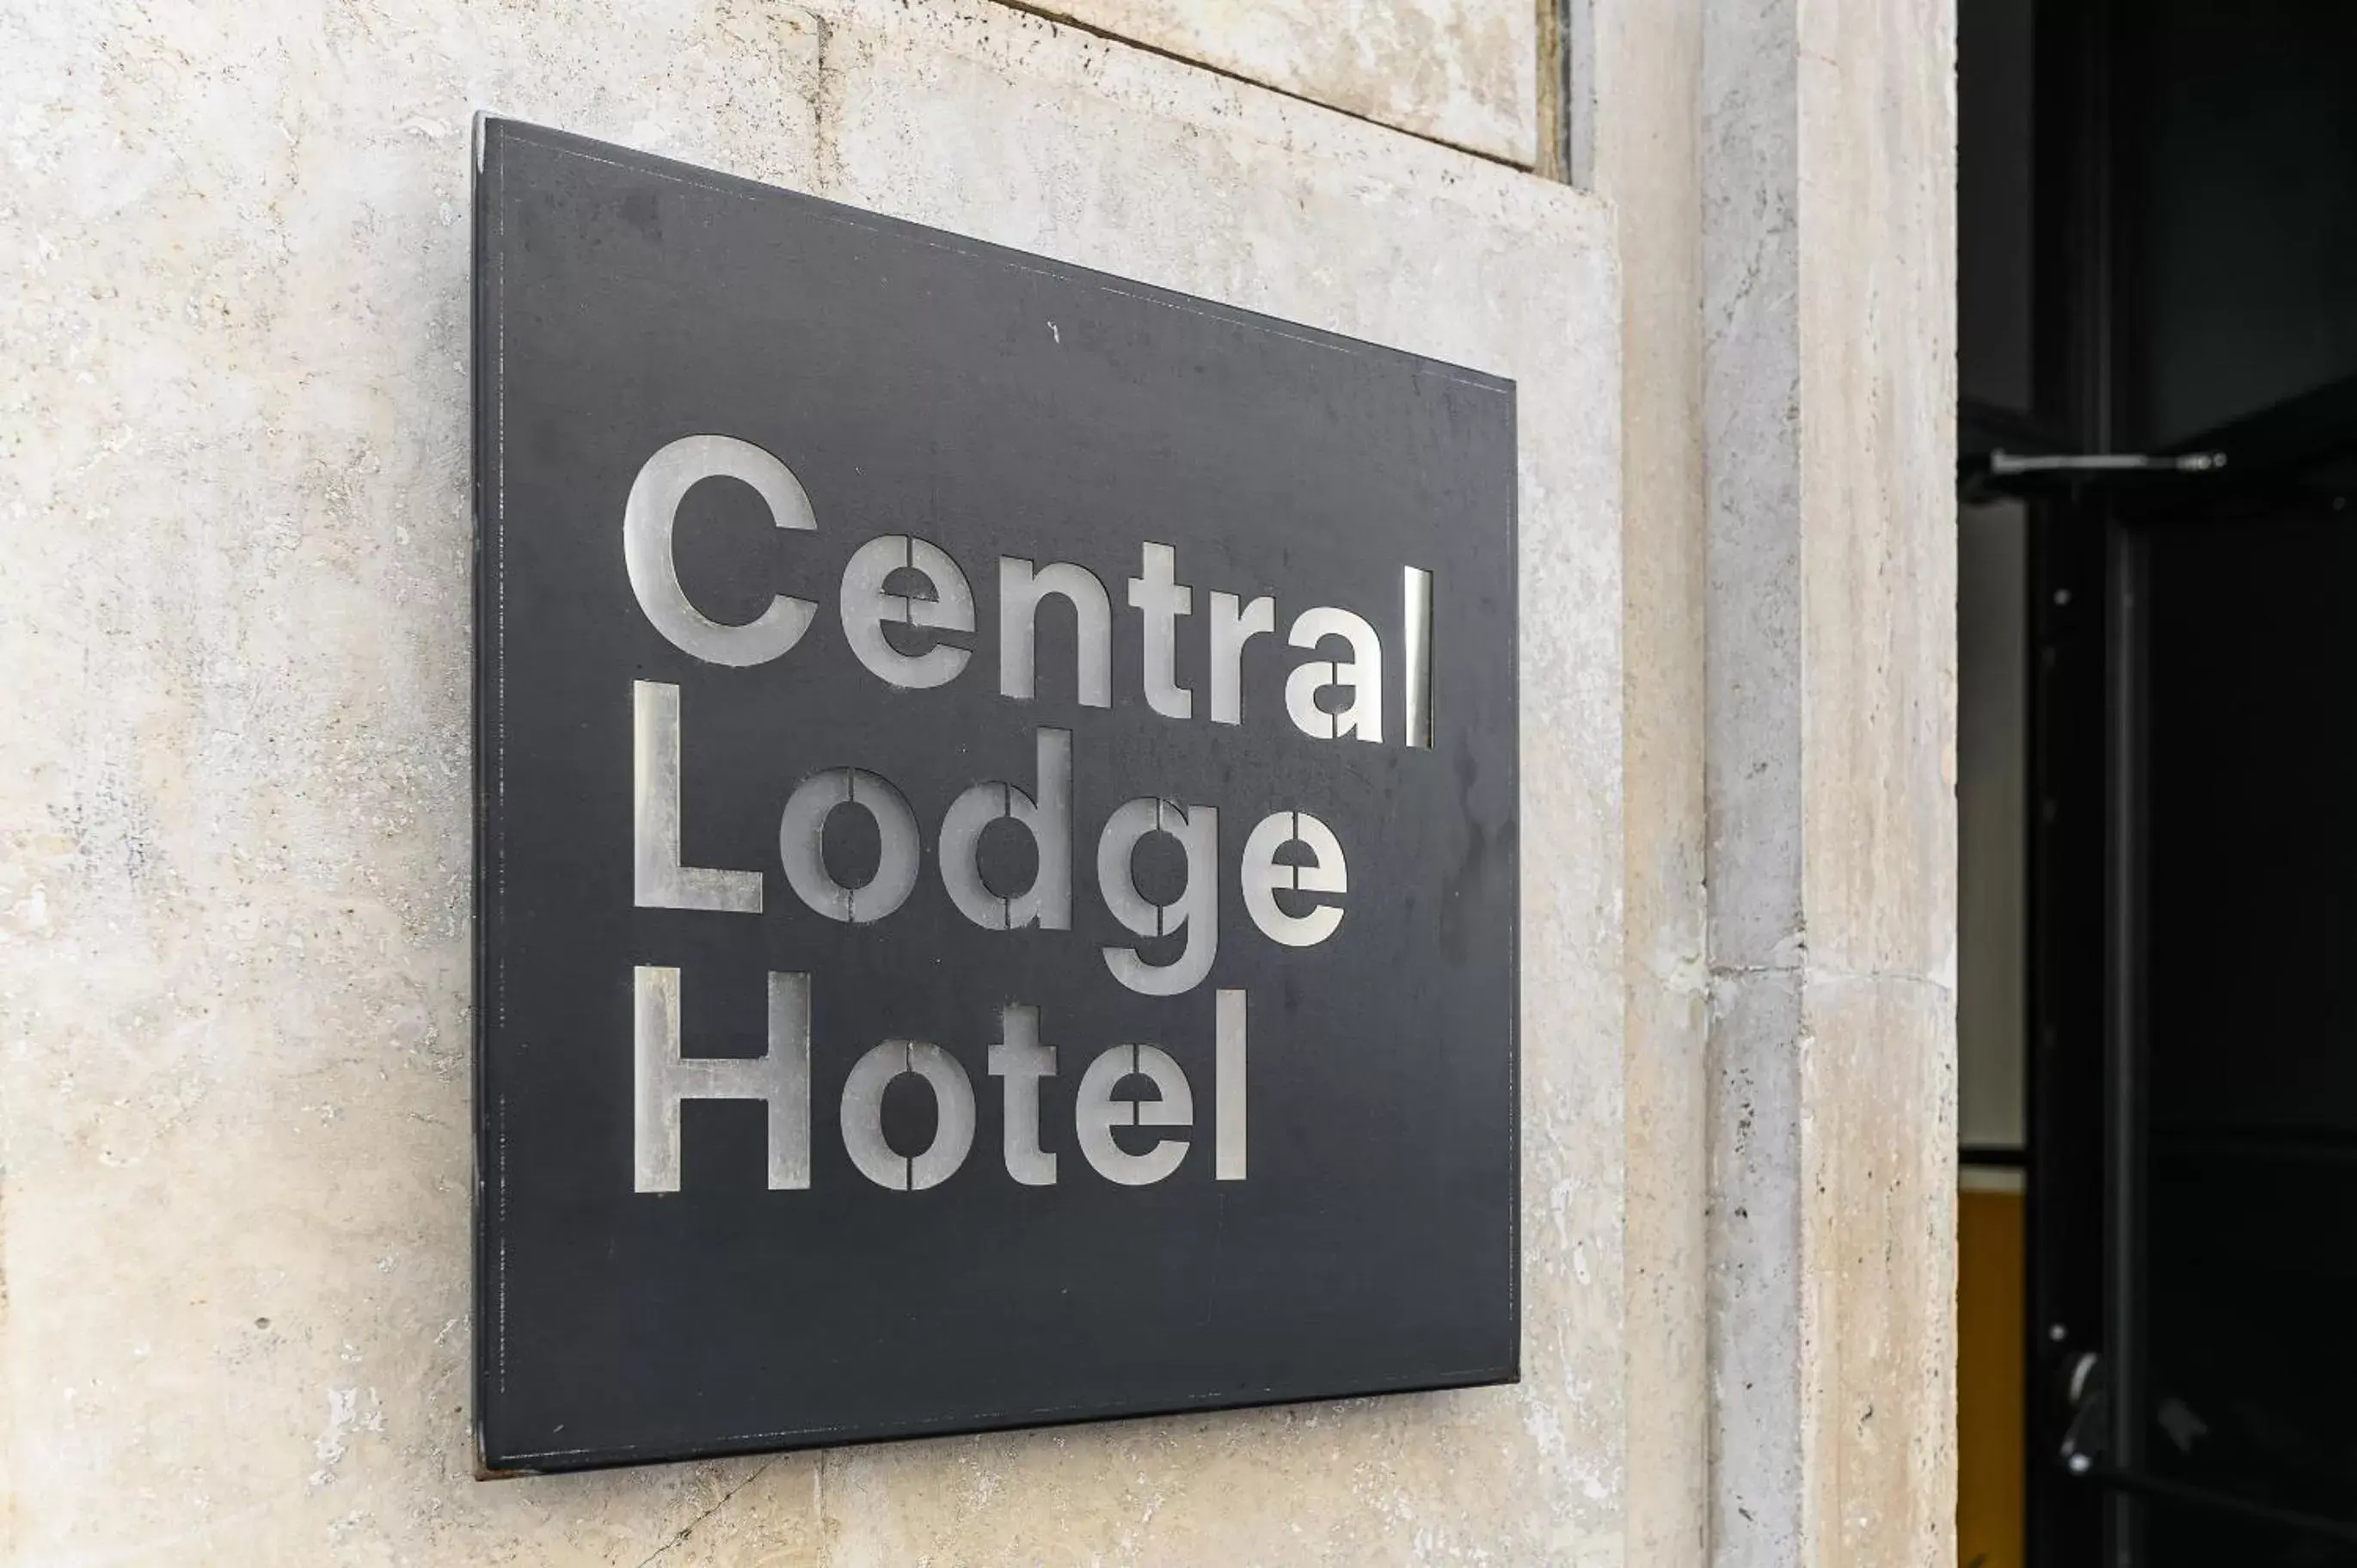 Property logo or sign in Central Lodge Hotel